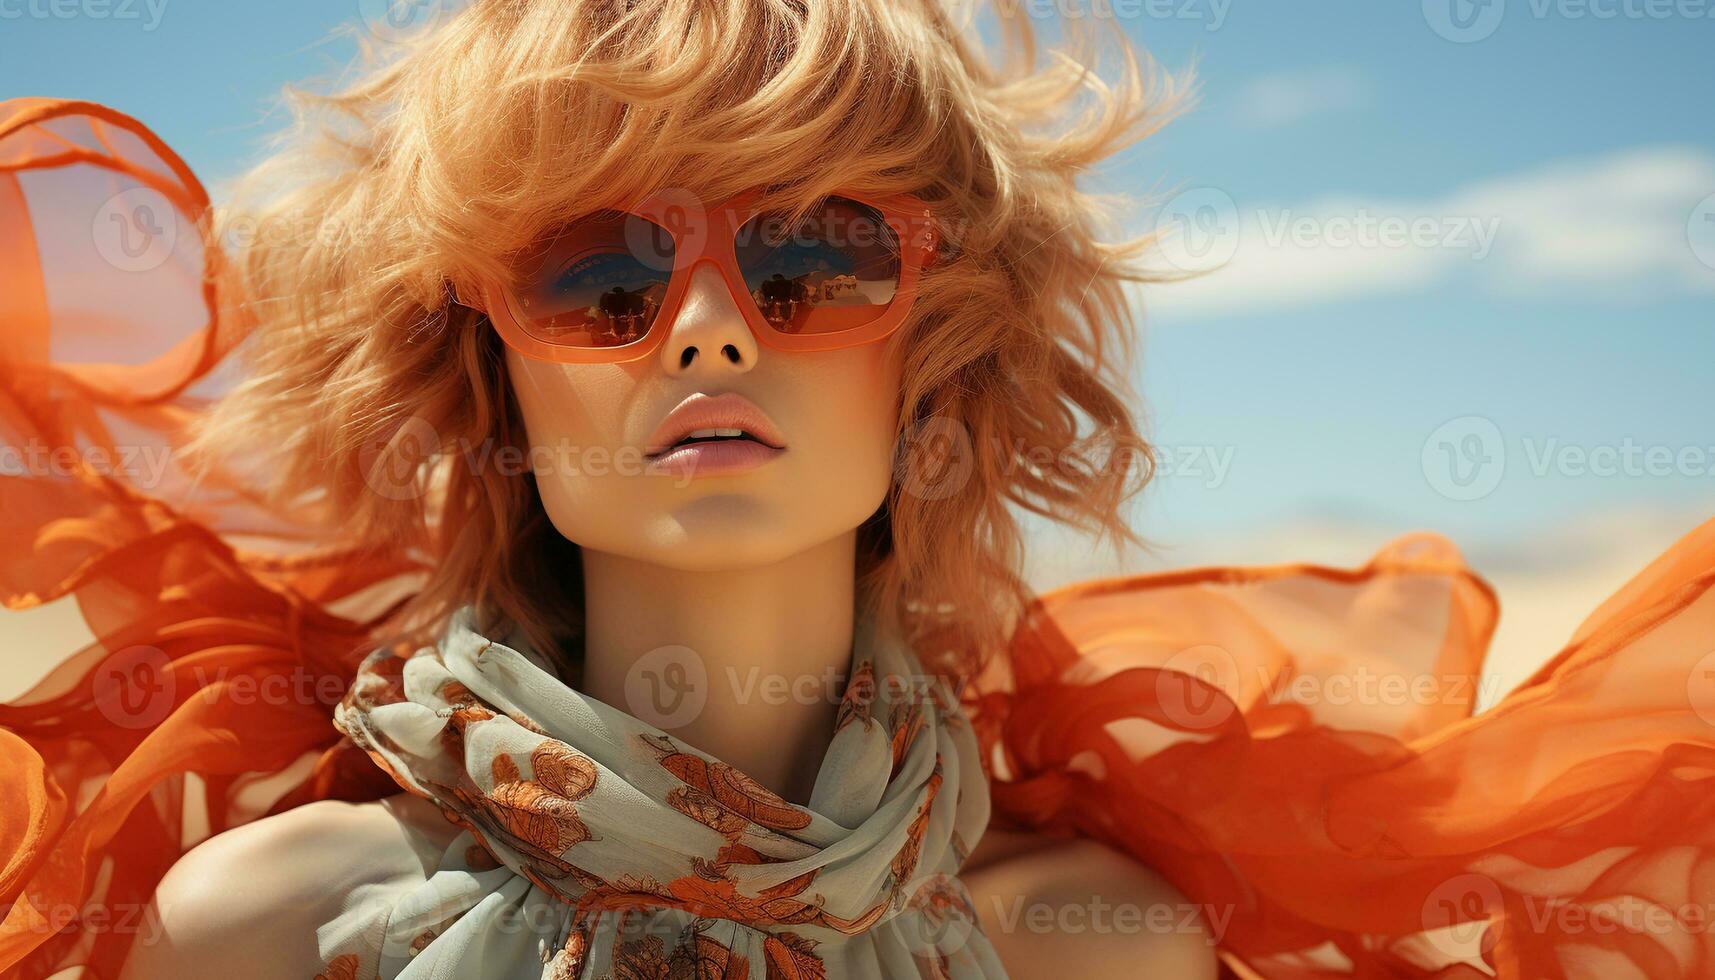 Caucasian woman, fashion model, blond hair, sunglasses, smiling, elegance, beauty generated by AI photo